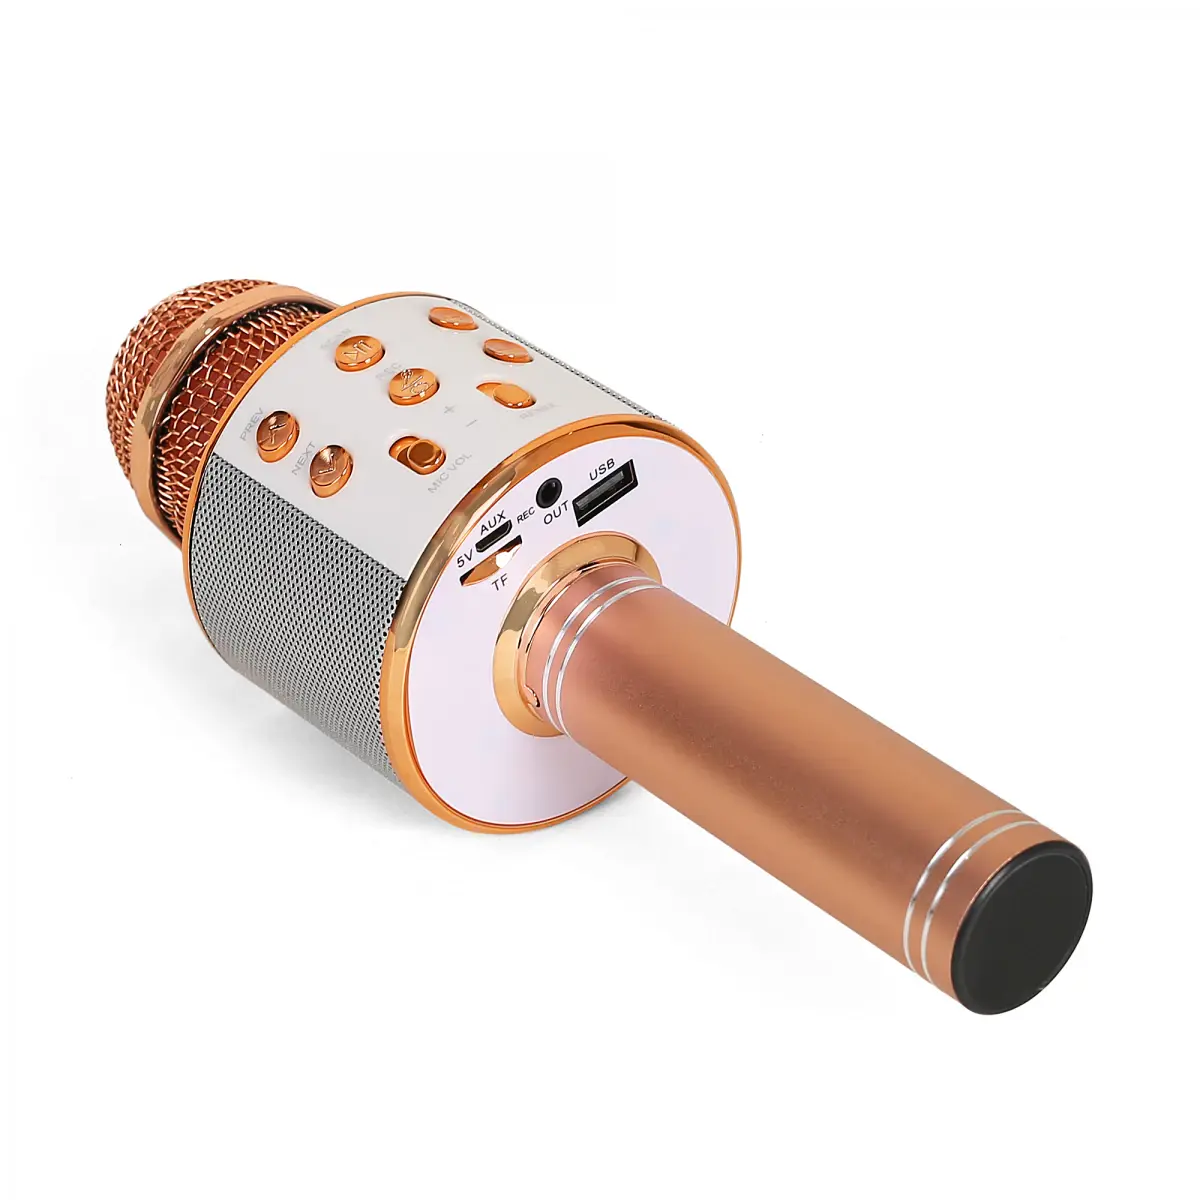 Hamleys Party Mic for Kids, Rosegold, 5Y+